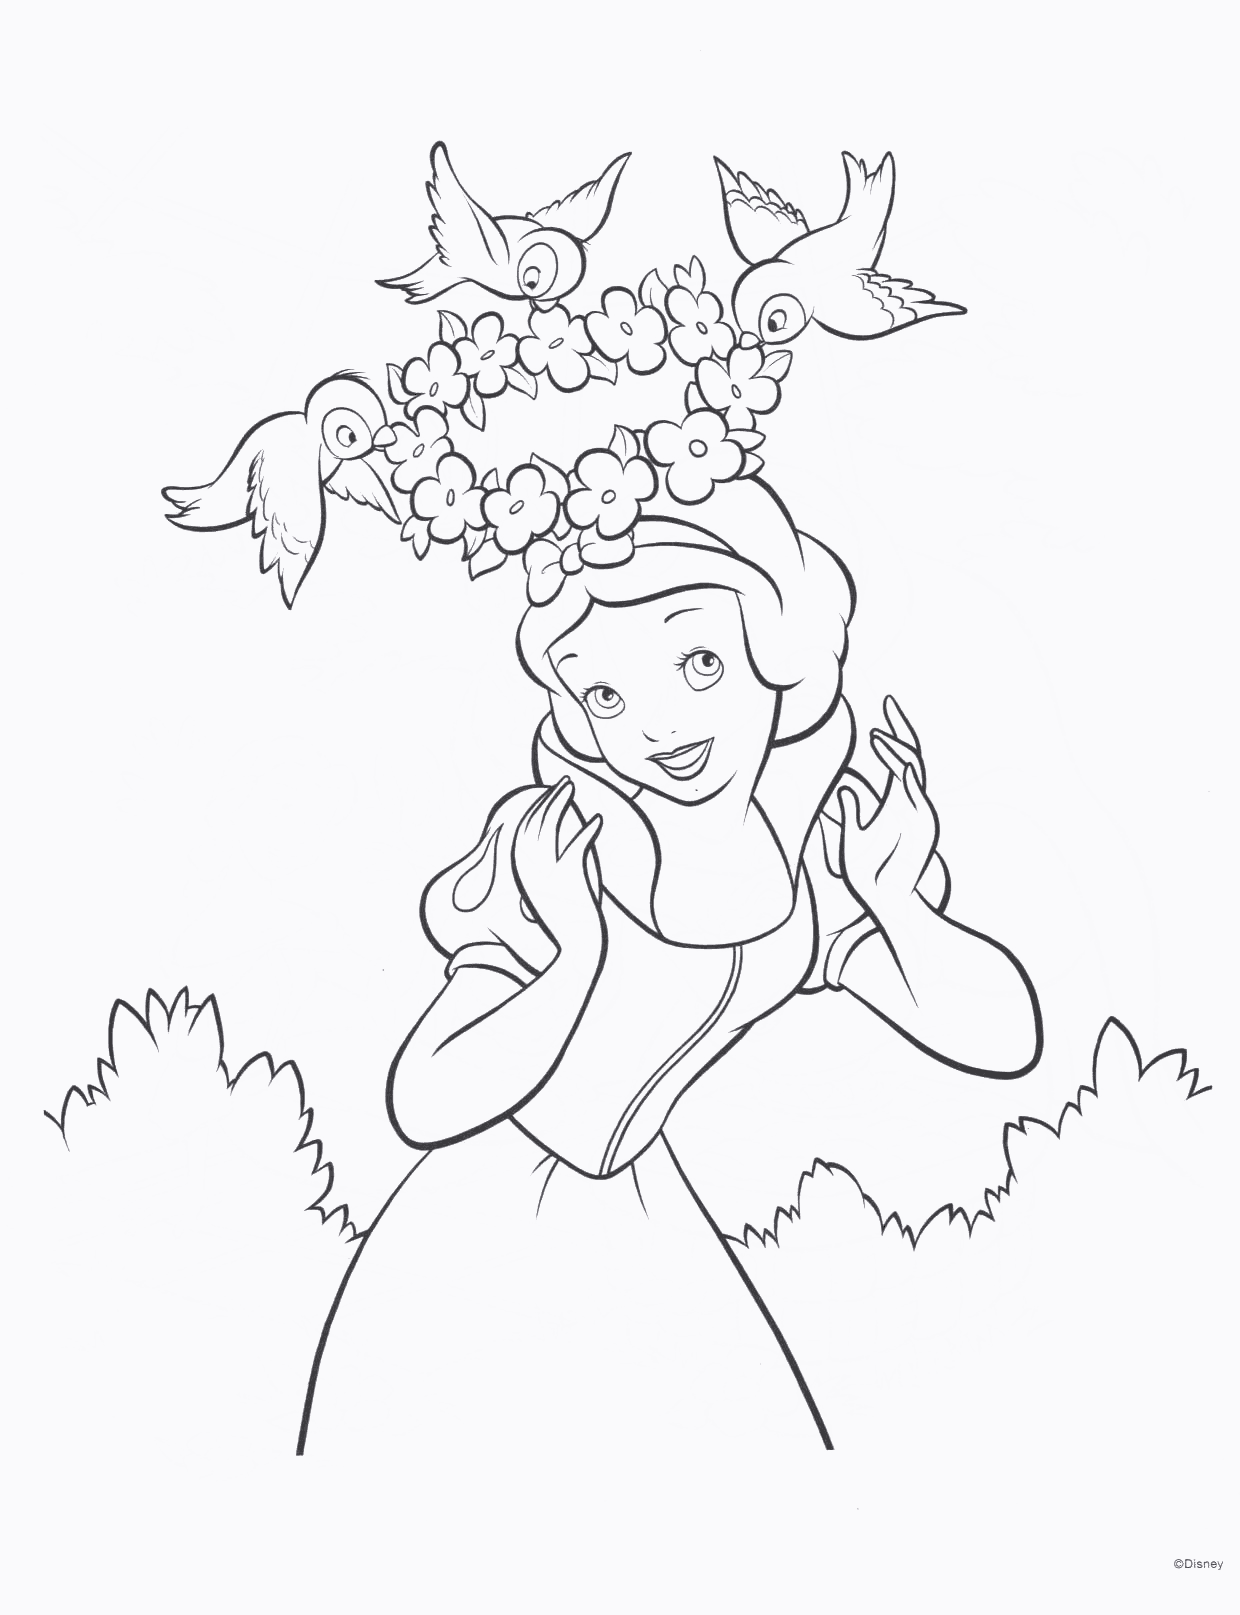 Free Printable Disney Princess Coloring Pages For Kids Coloring Wallpapers Download Free Images Wallpaper [coloring876.blogspot.com]